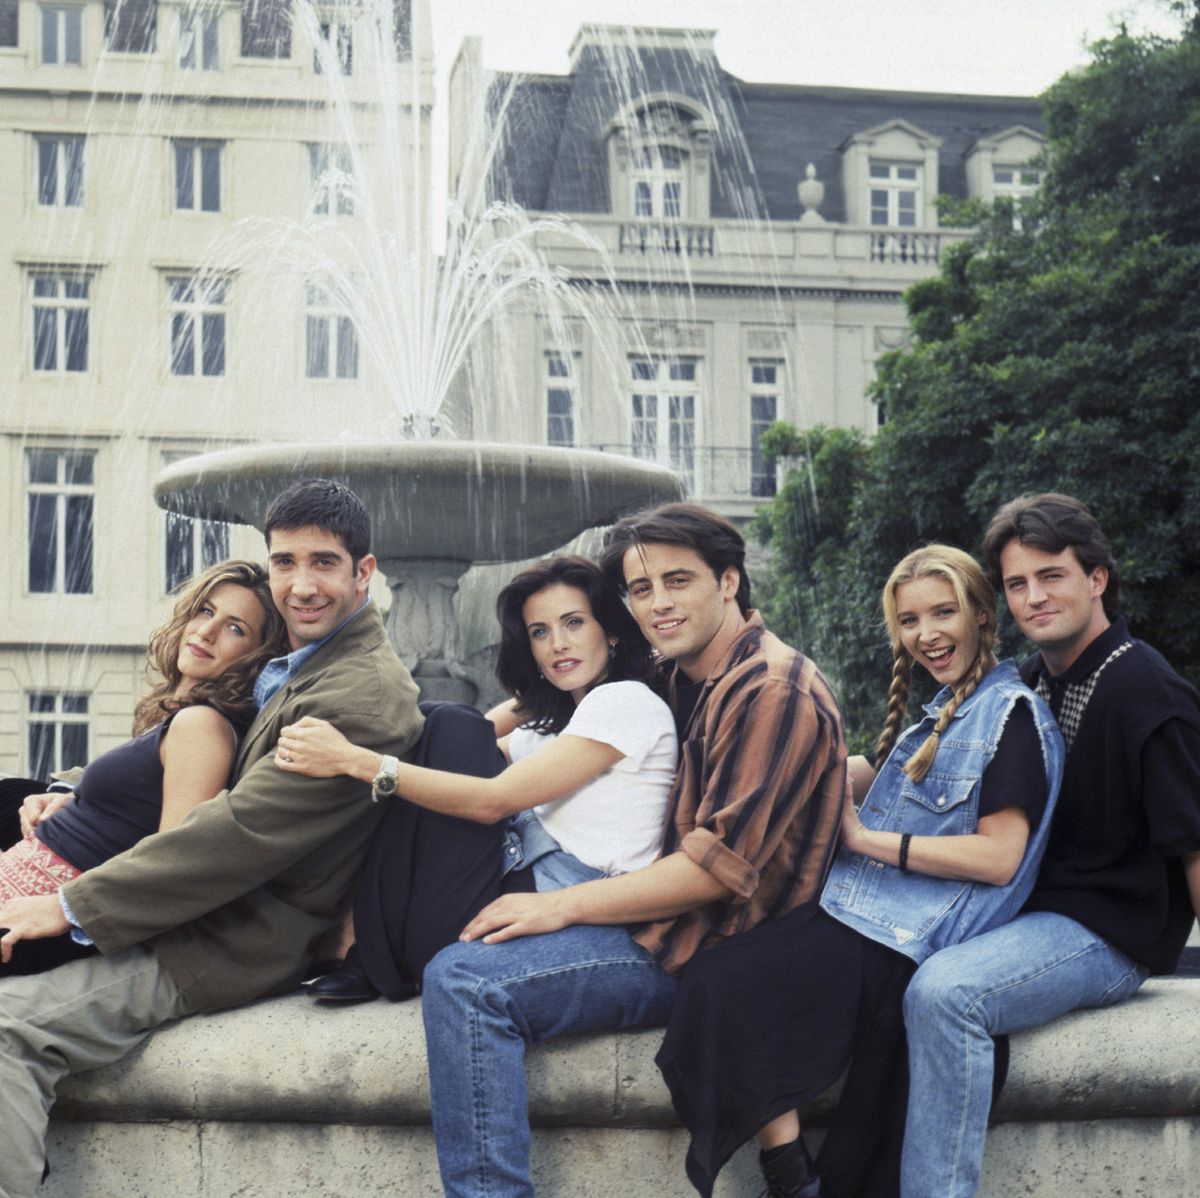 Friends: The Reunion on HBO Max review: Empty, nostalgic comfort - Vox